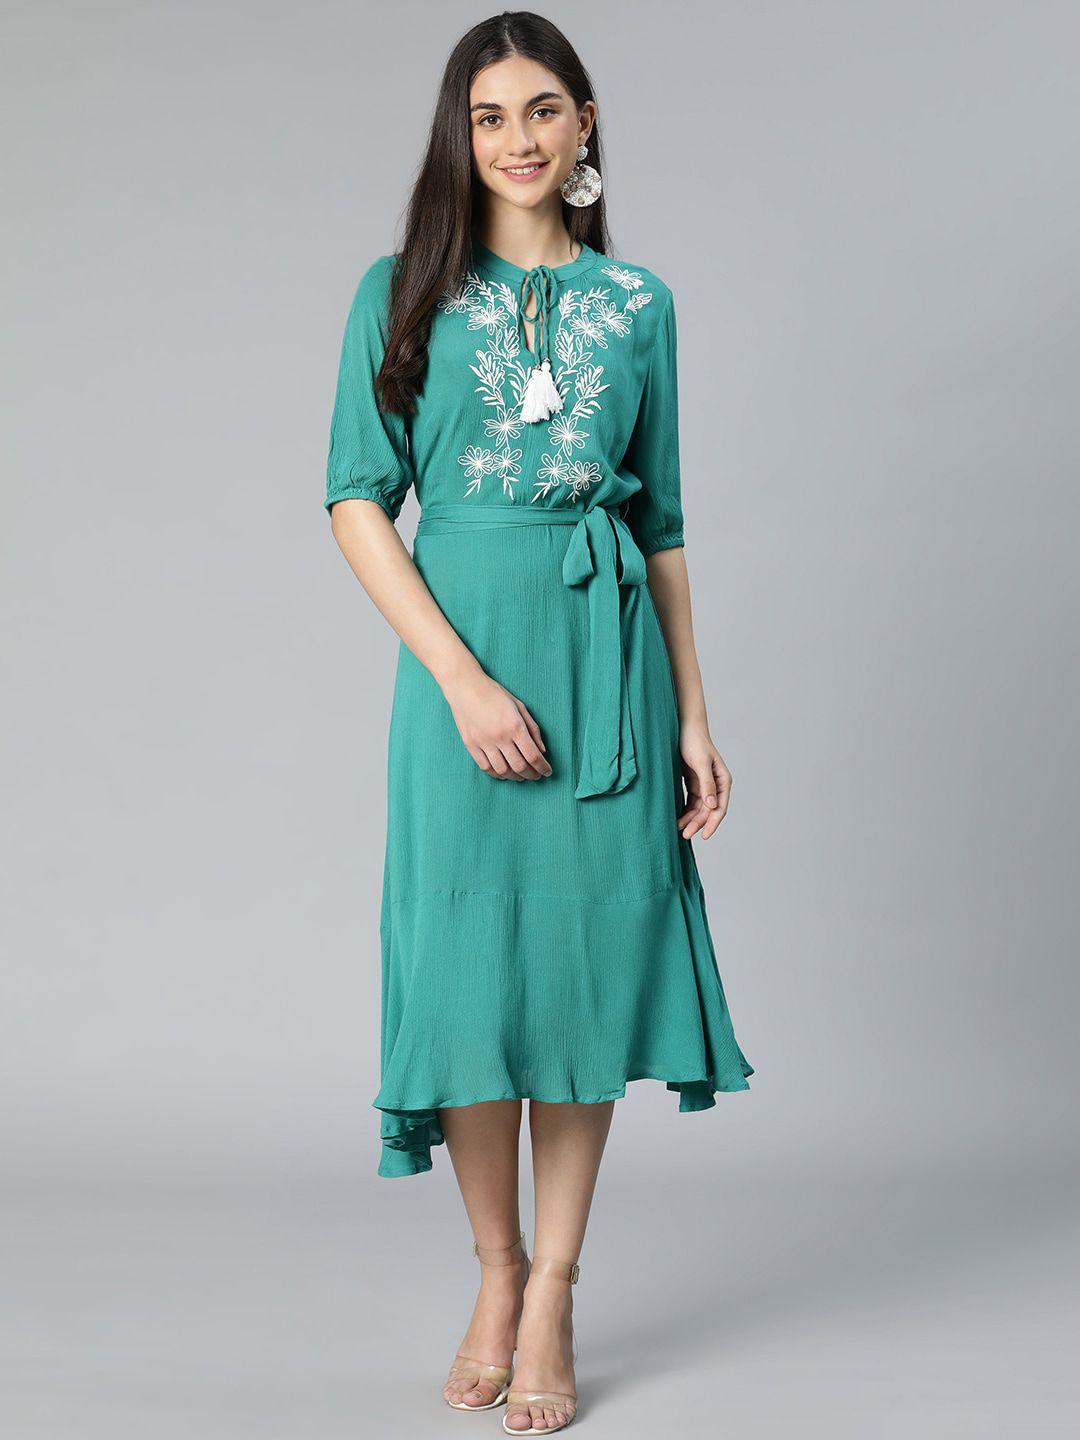 oxolloxo green floral tie-up neck midi dress